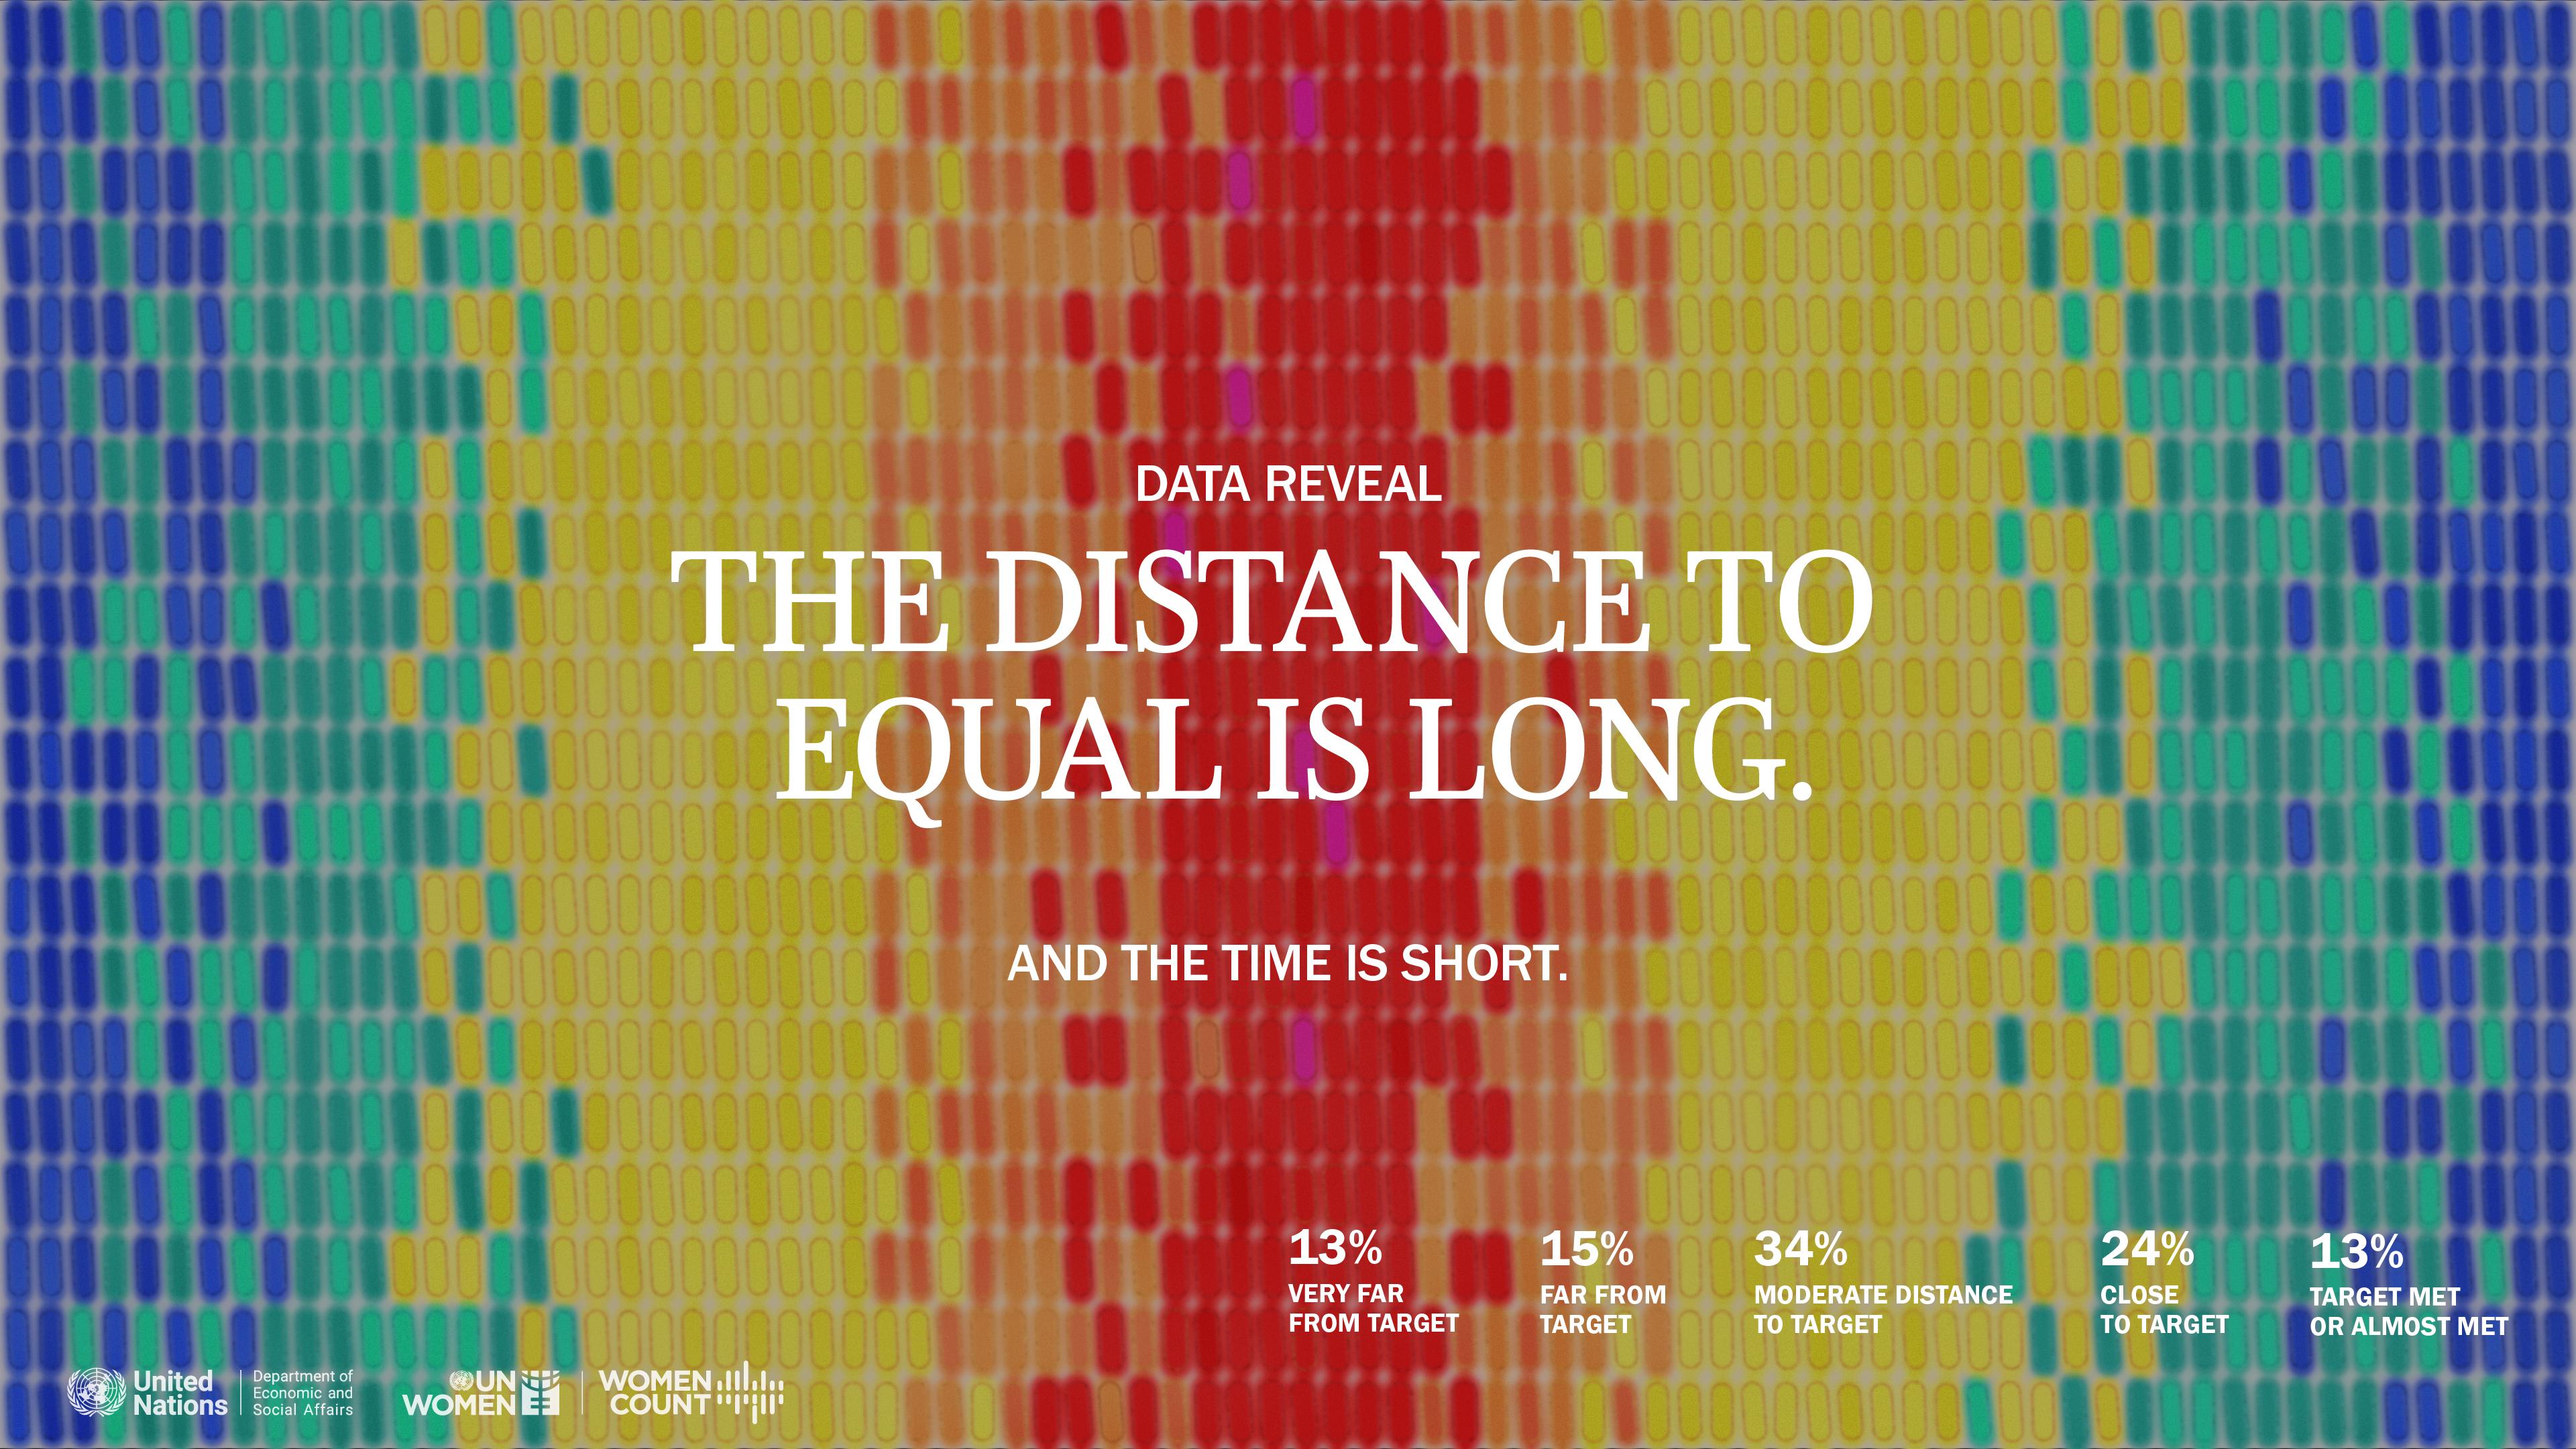 The distance to equal is long. Time is short